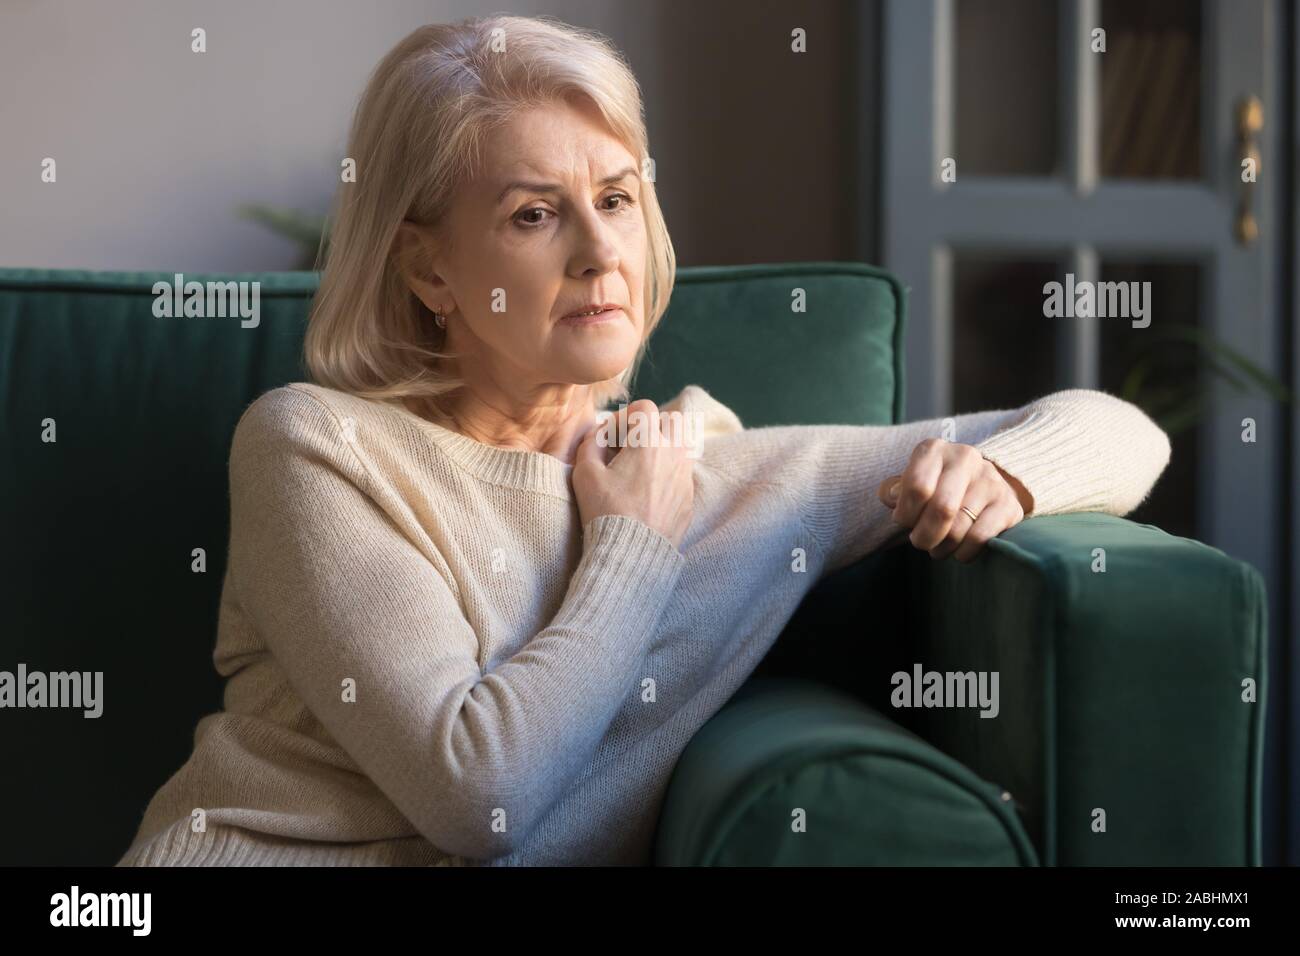 Mature depressed woman lost on thoughts sitting on couch Stock Photo